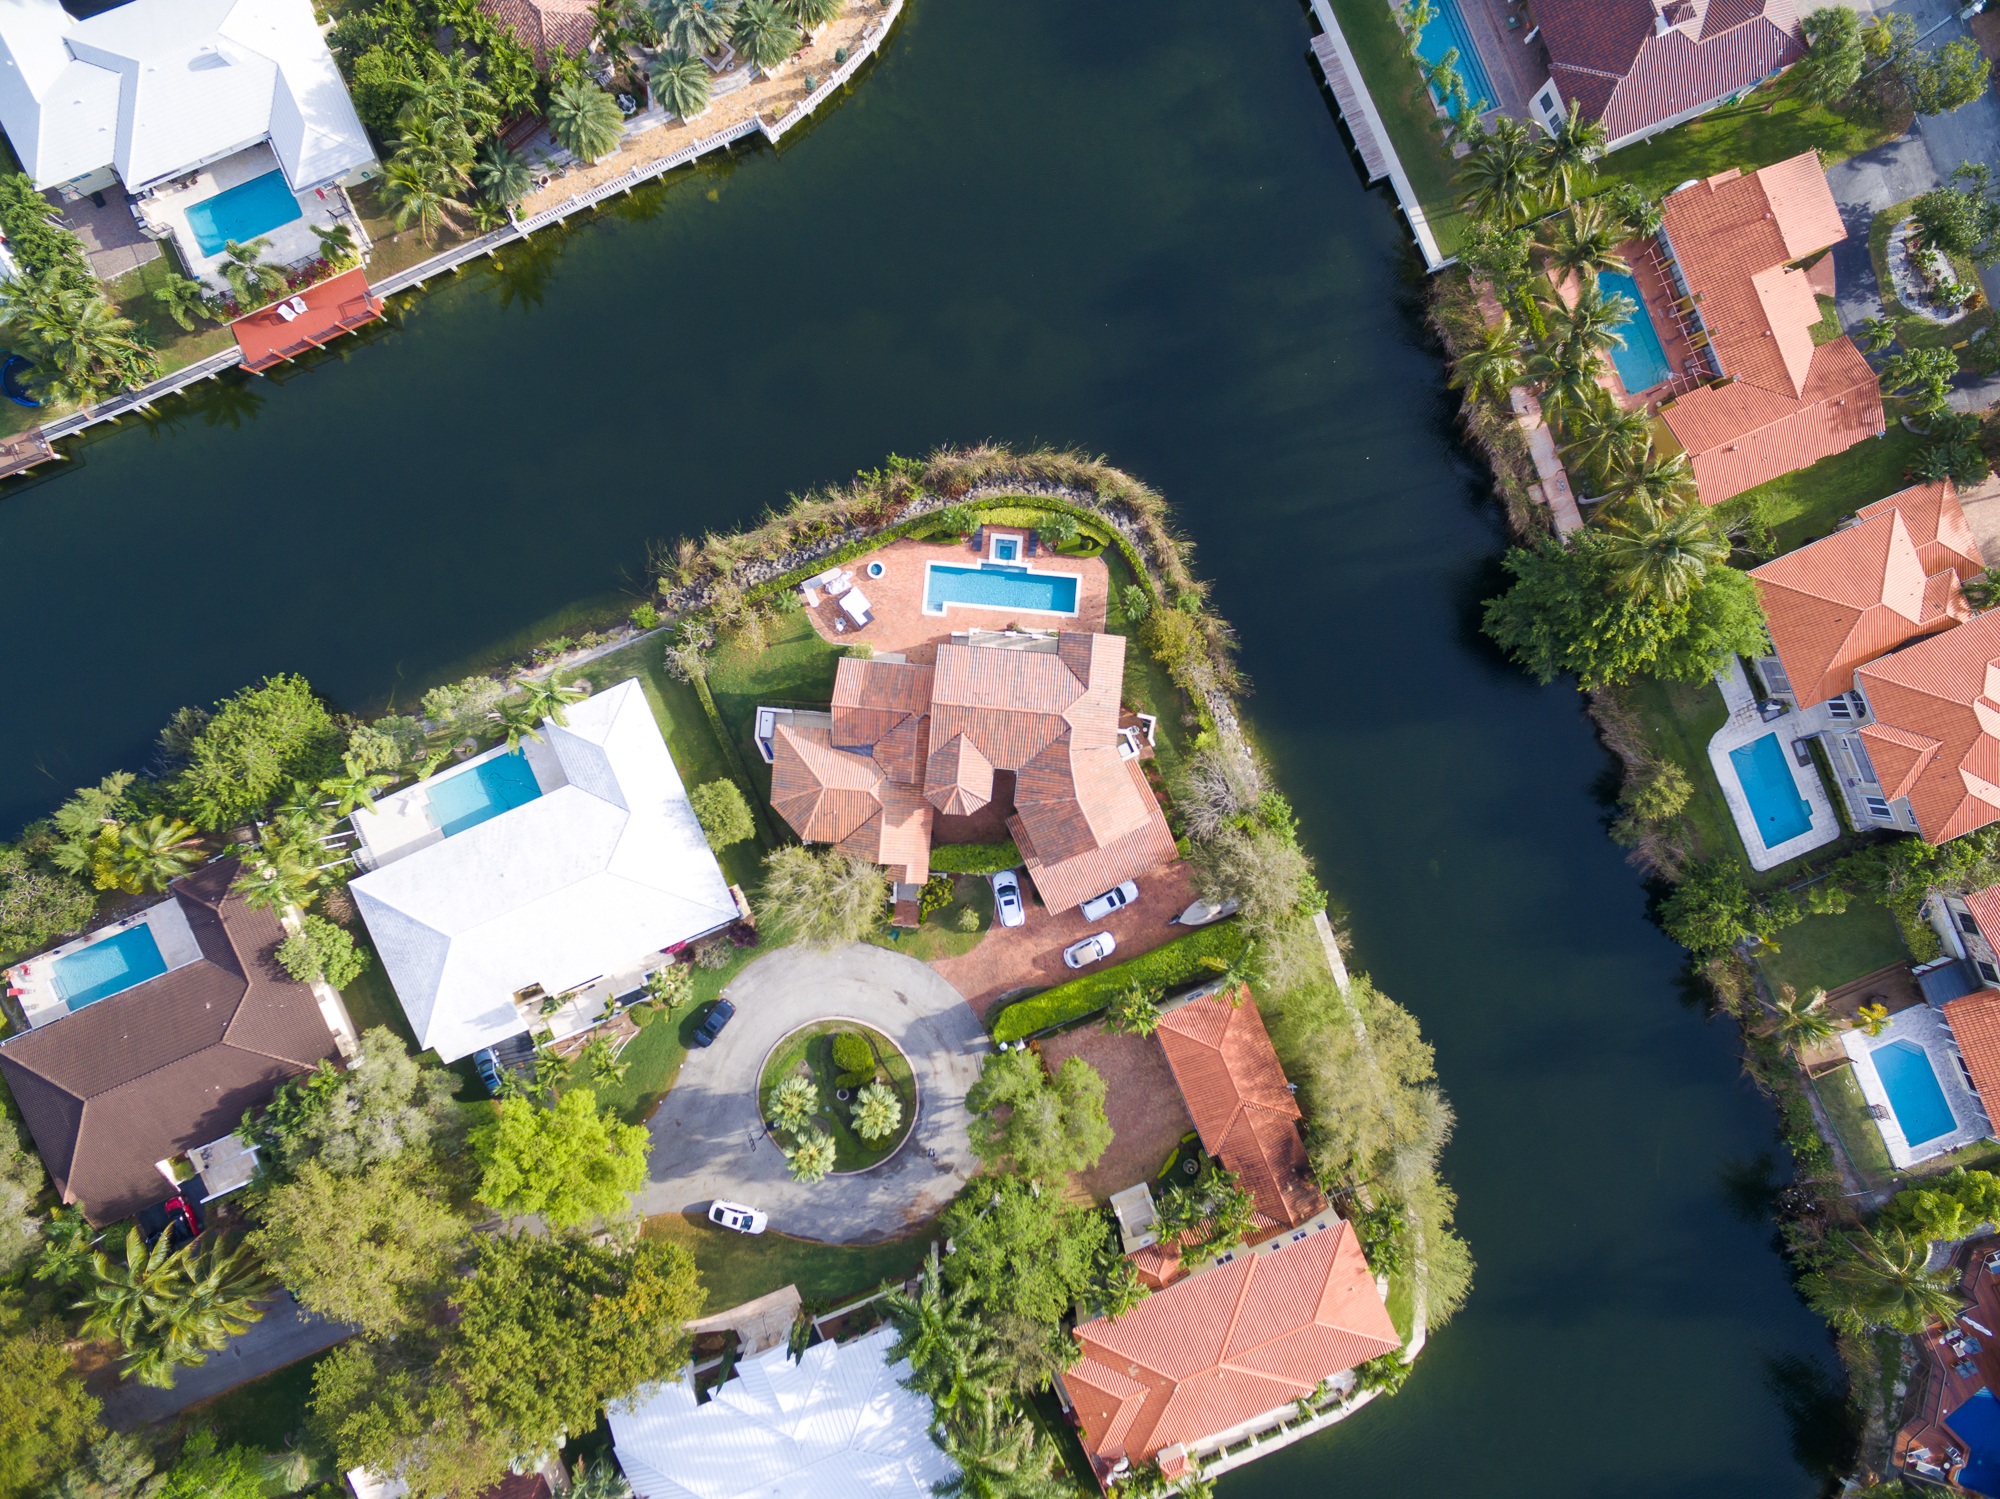 Miami’s Residential Real Estate Volume Is Up Double Digits Of Last Year